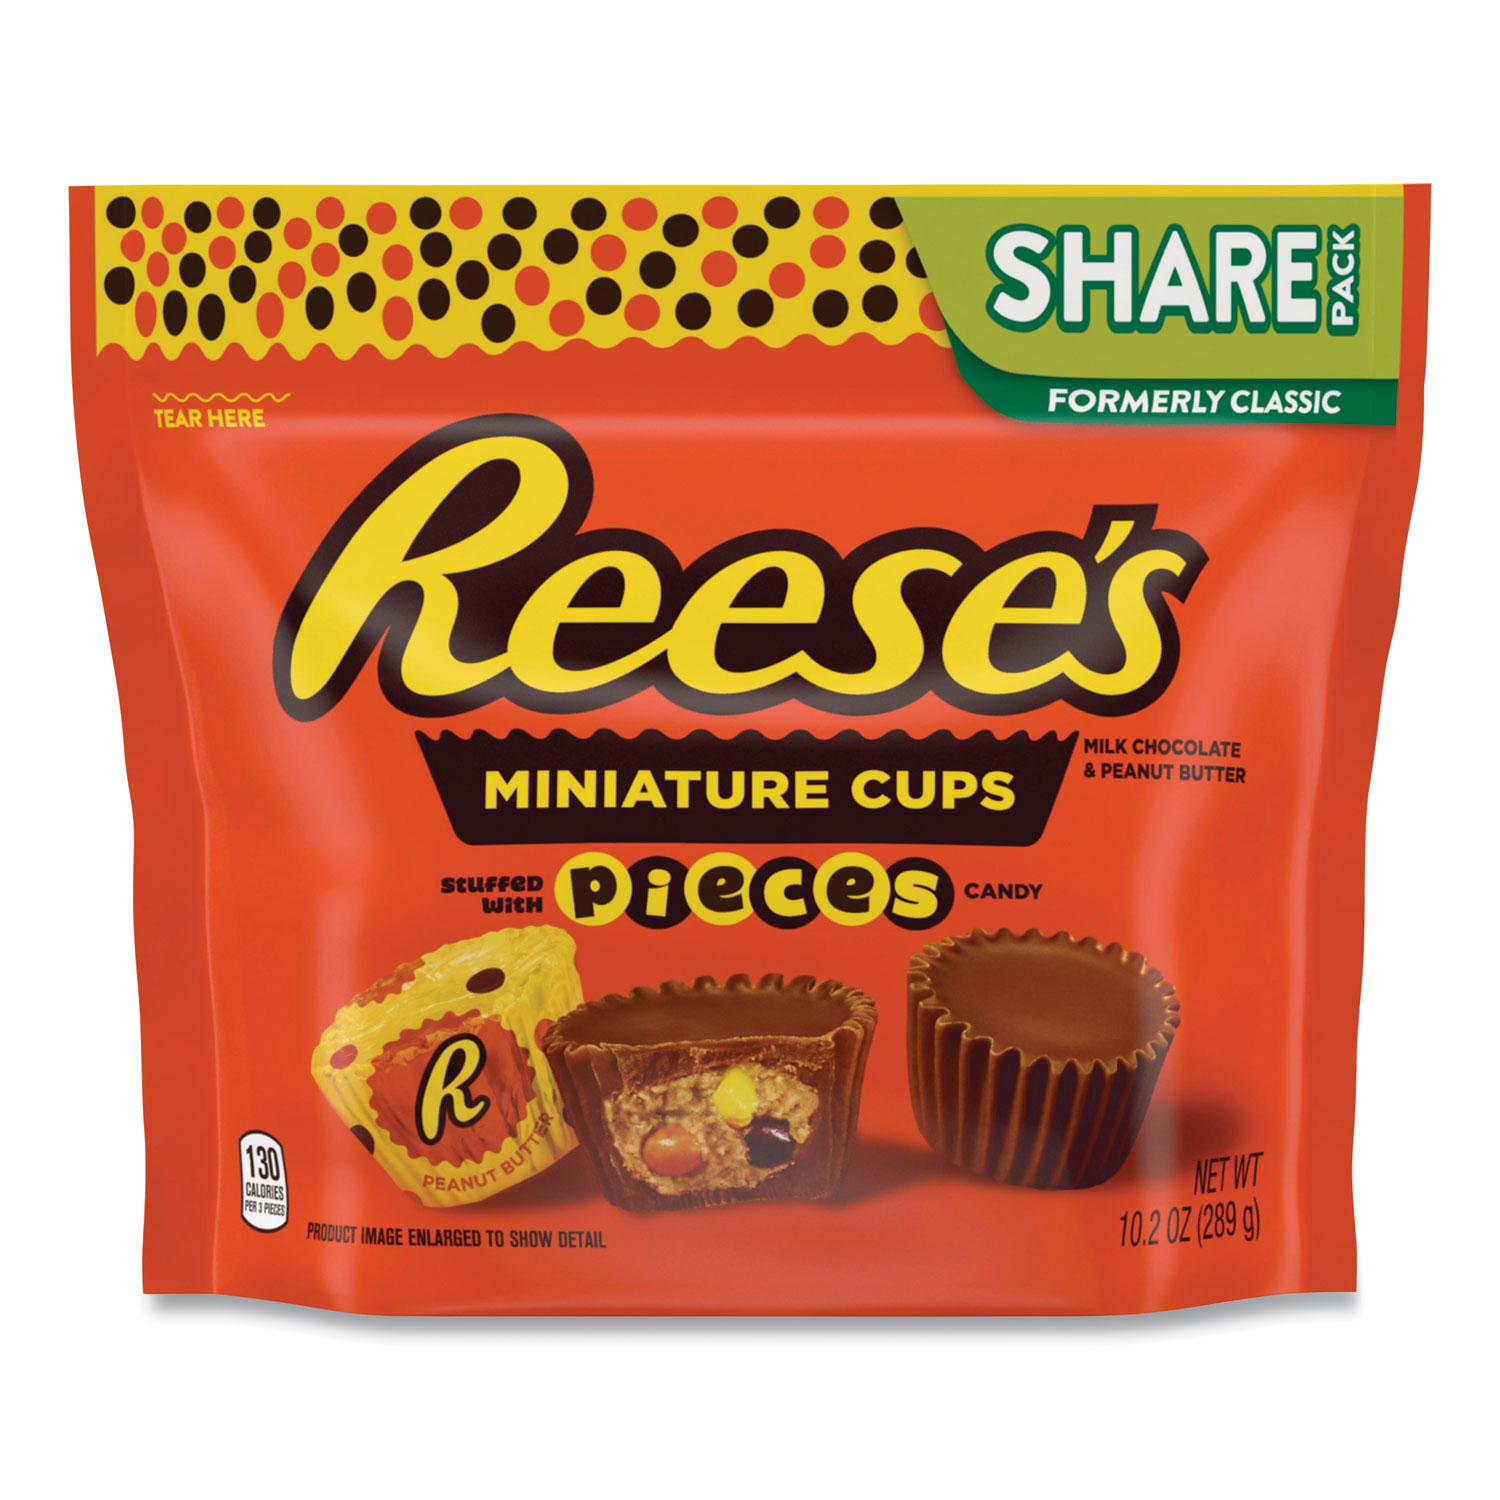  Reese's 43226 Peanut Butter Cups with Reese's Pieces Miniatures Share Pack, 10.2 oz Bag, 3 Bags/Pack, Free Delivery in 1-4 Business Days (GRR24600460) 